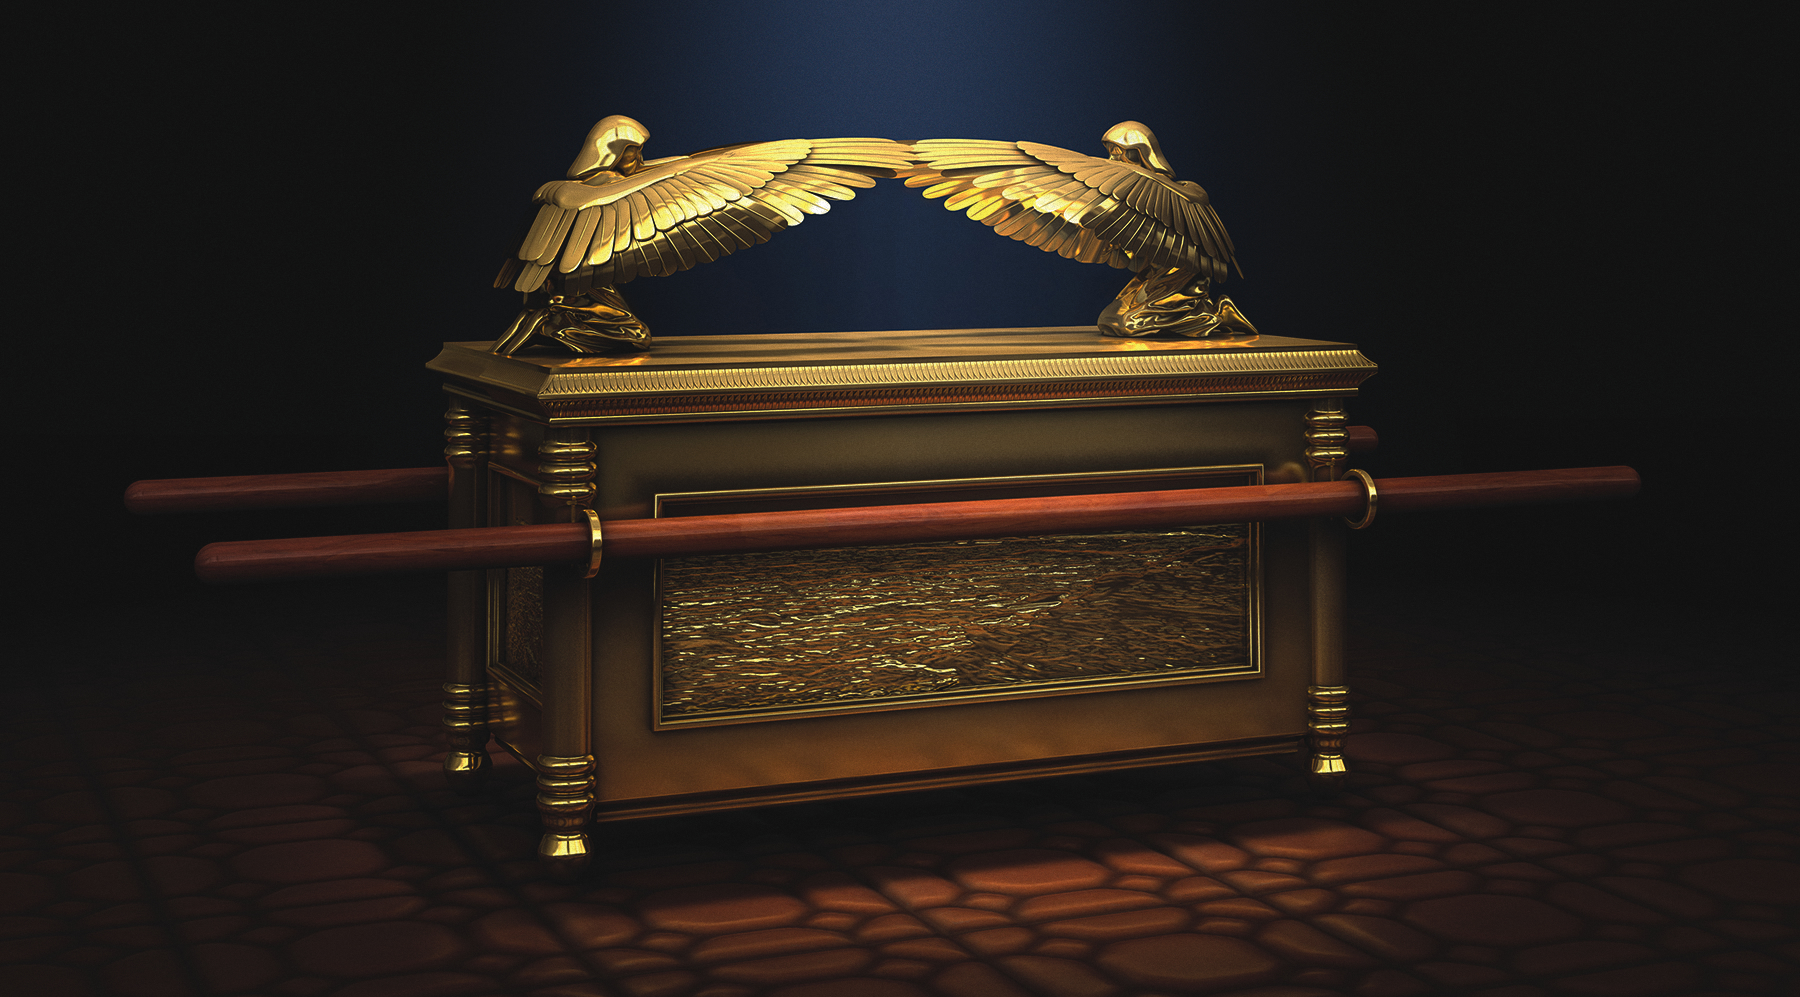 What Is The Purpose Of The Ark Of The Covenant